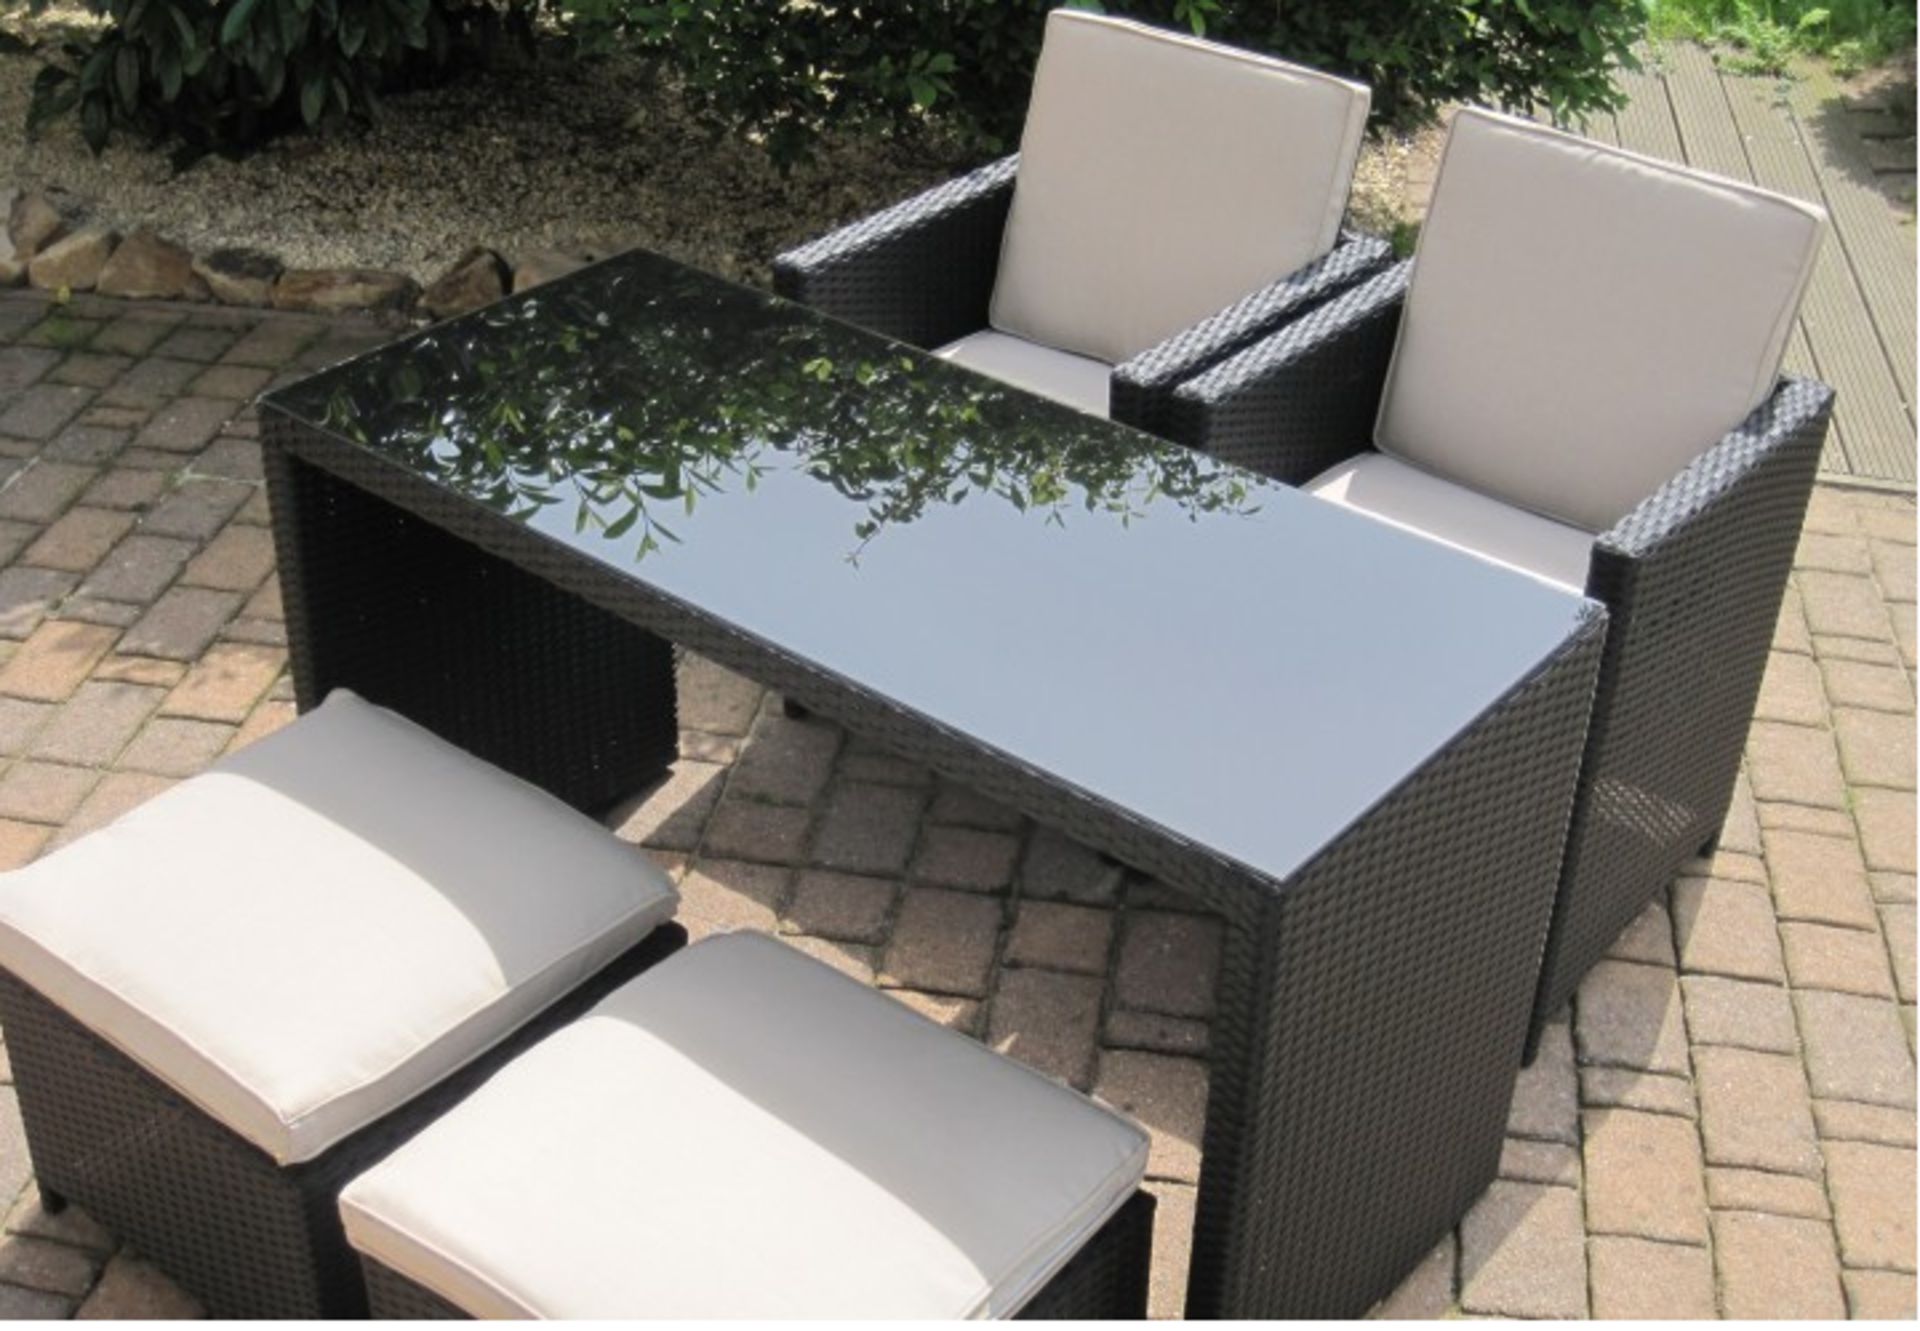 NEW Toscana balcony furniture set in Natural - Image 4 of 13